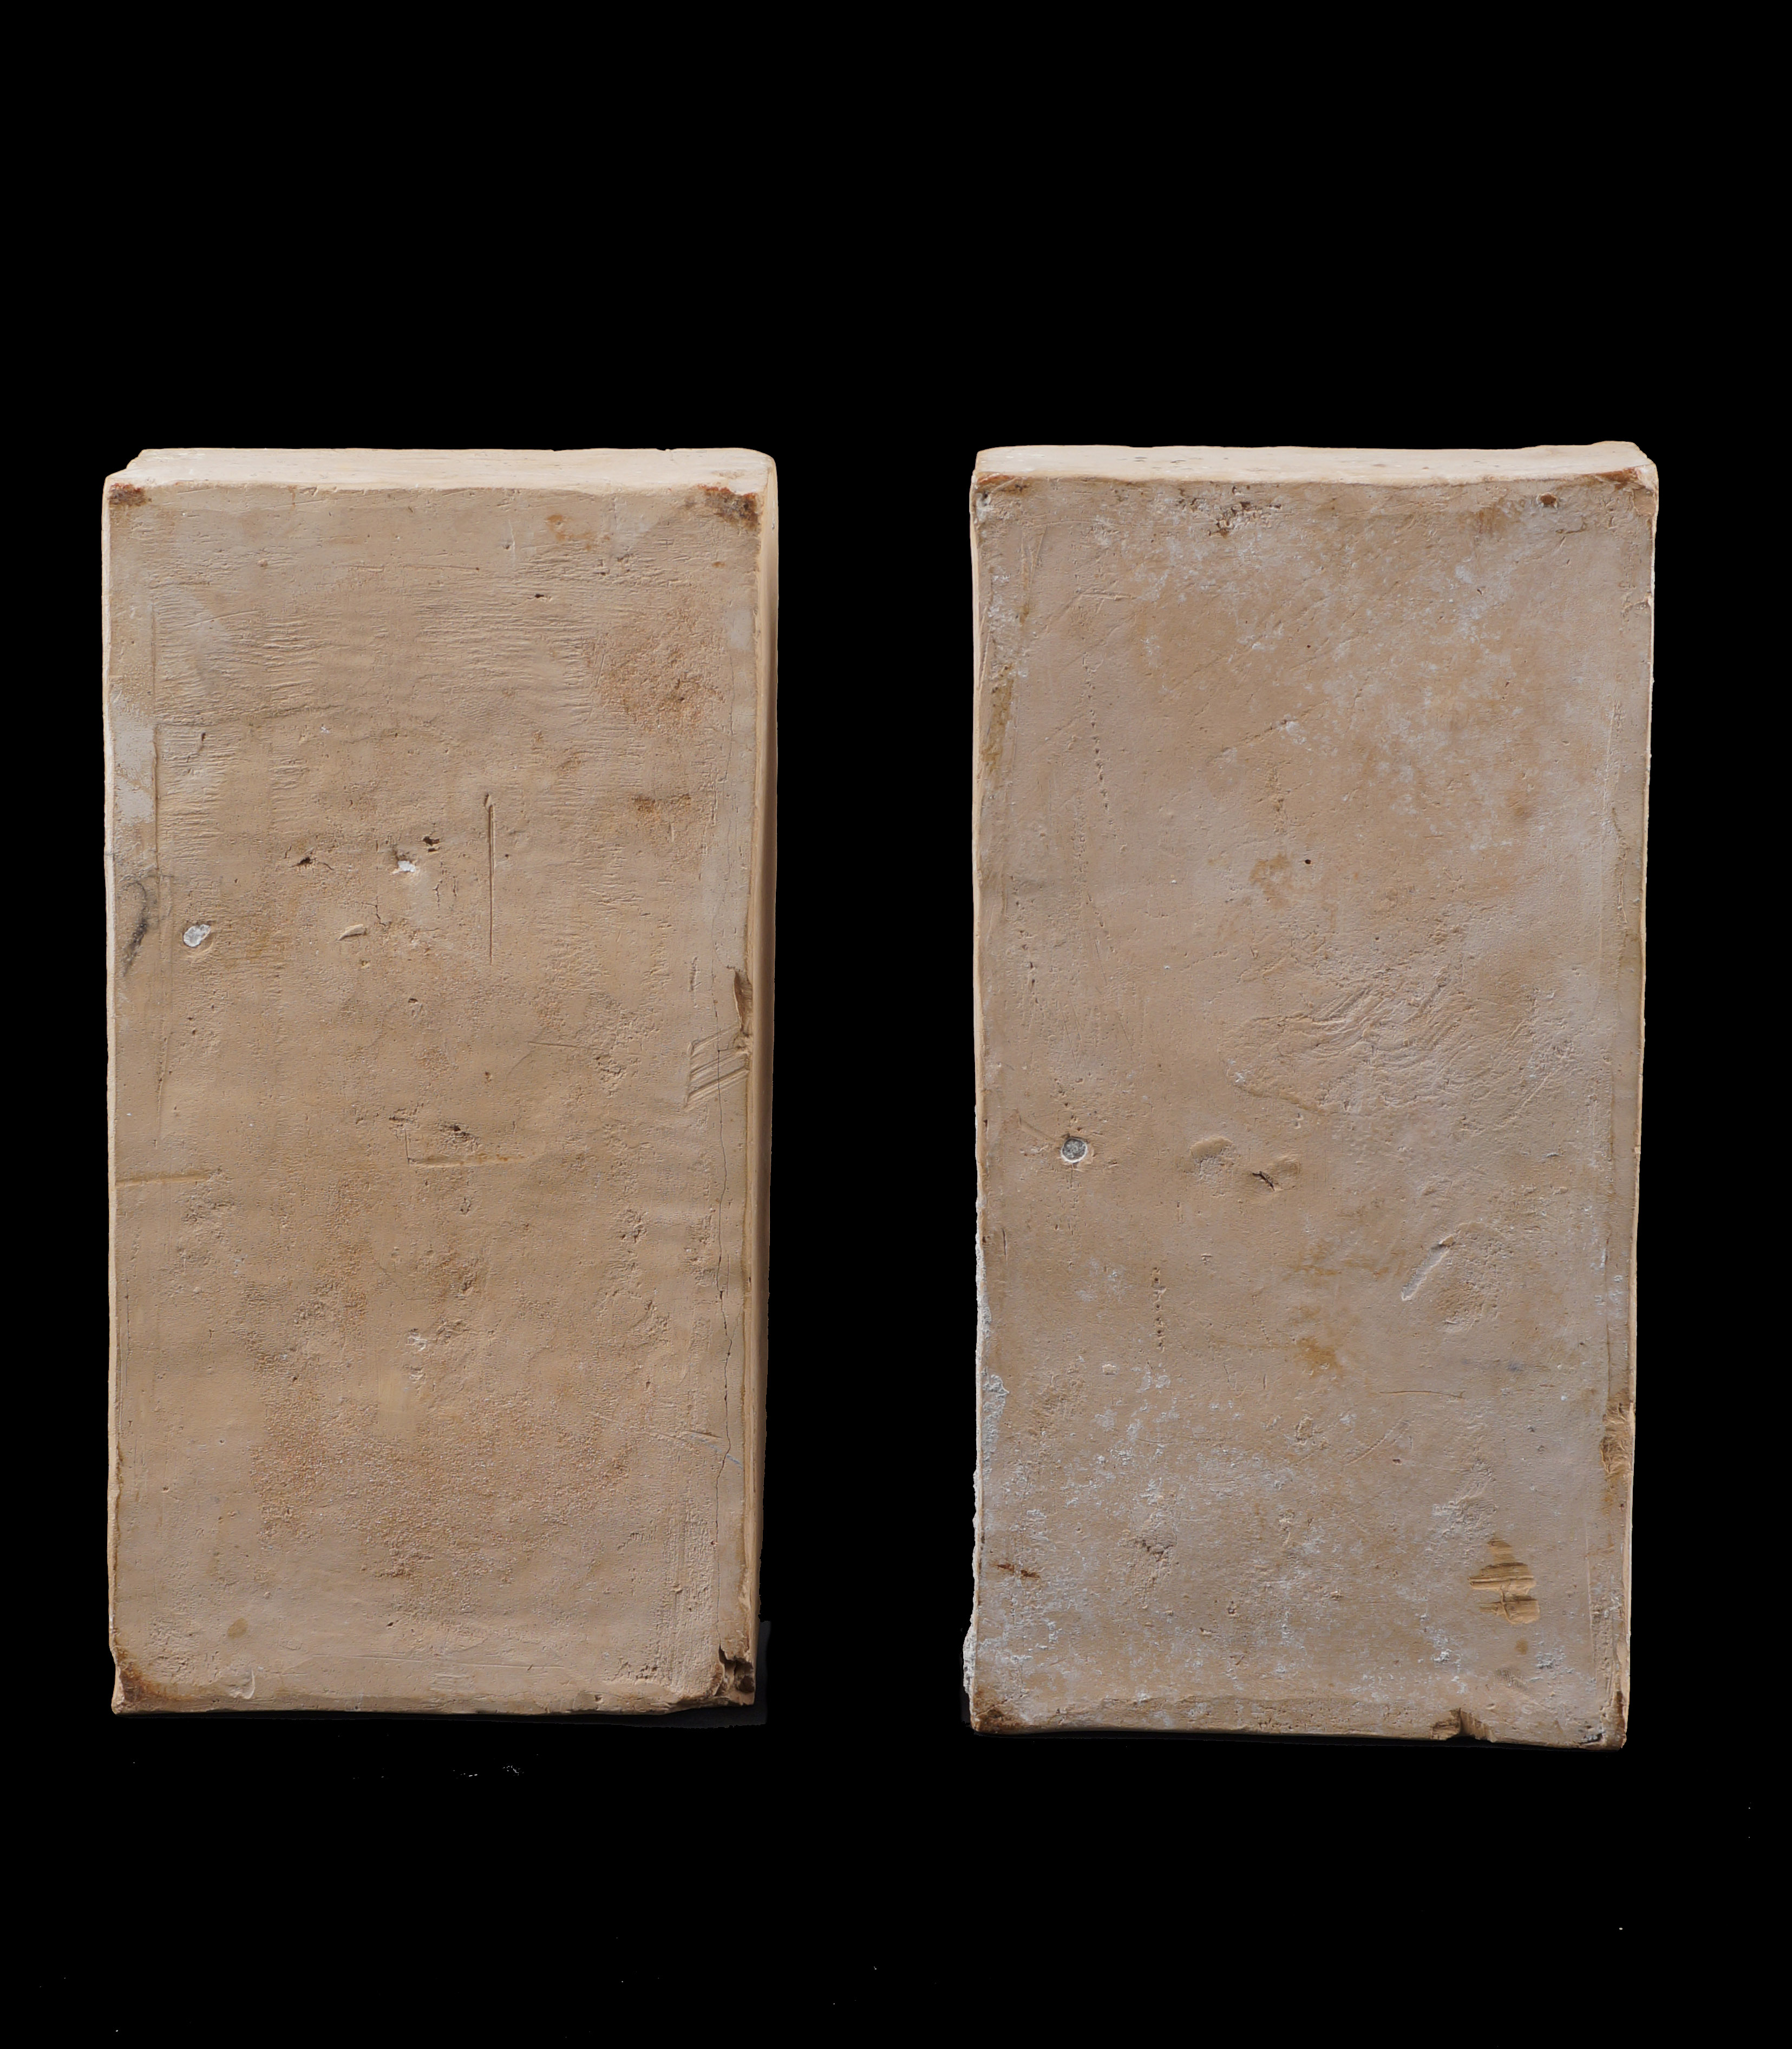 A pair of terracotta Porta Santa bricks Made in the occasion of the Jubileum of 1825 Pope Leo XII - Image 2 of 2